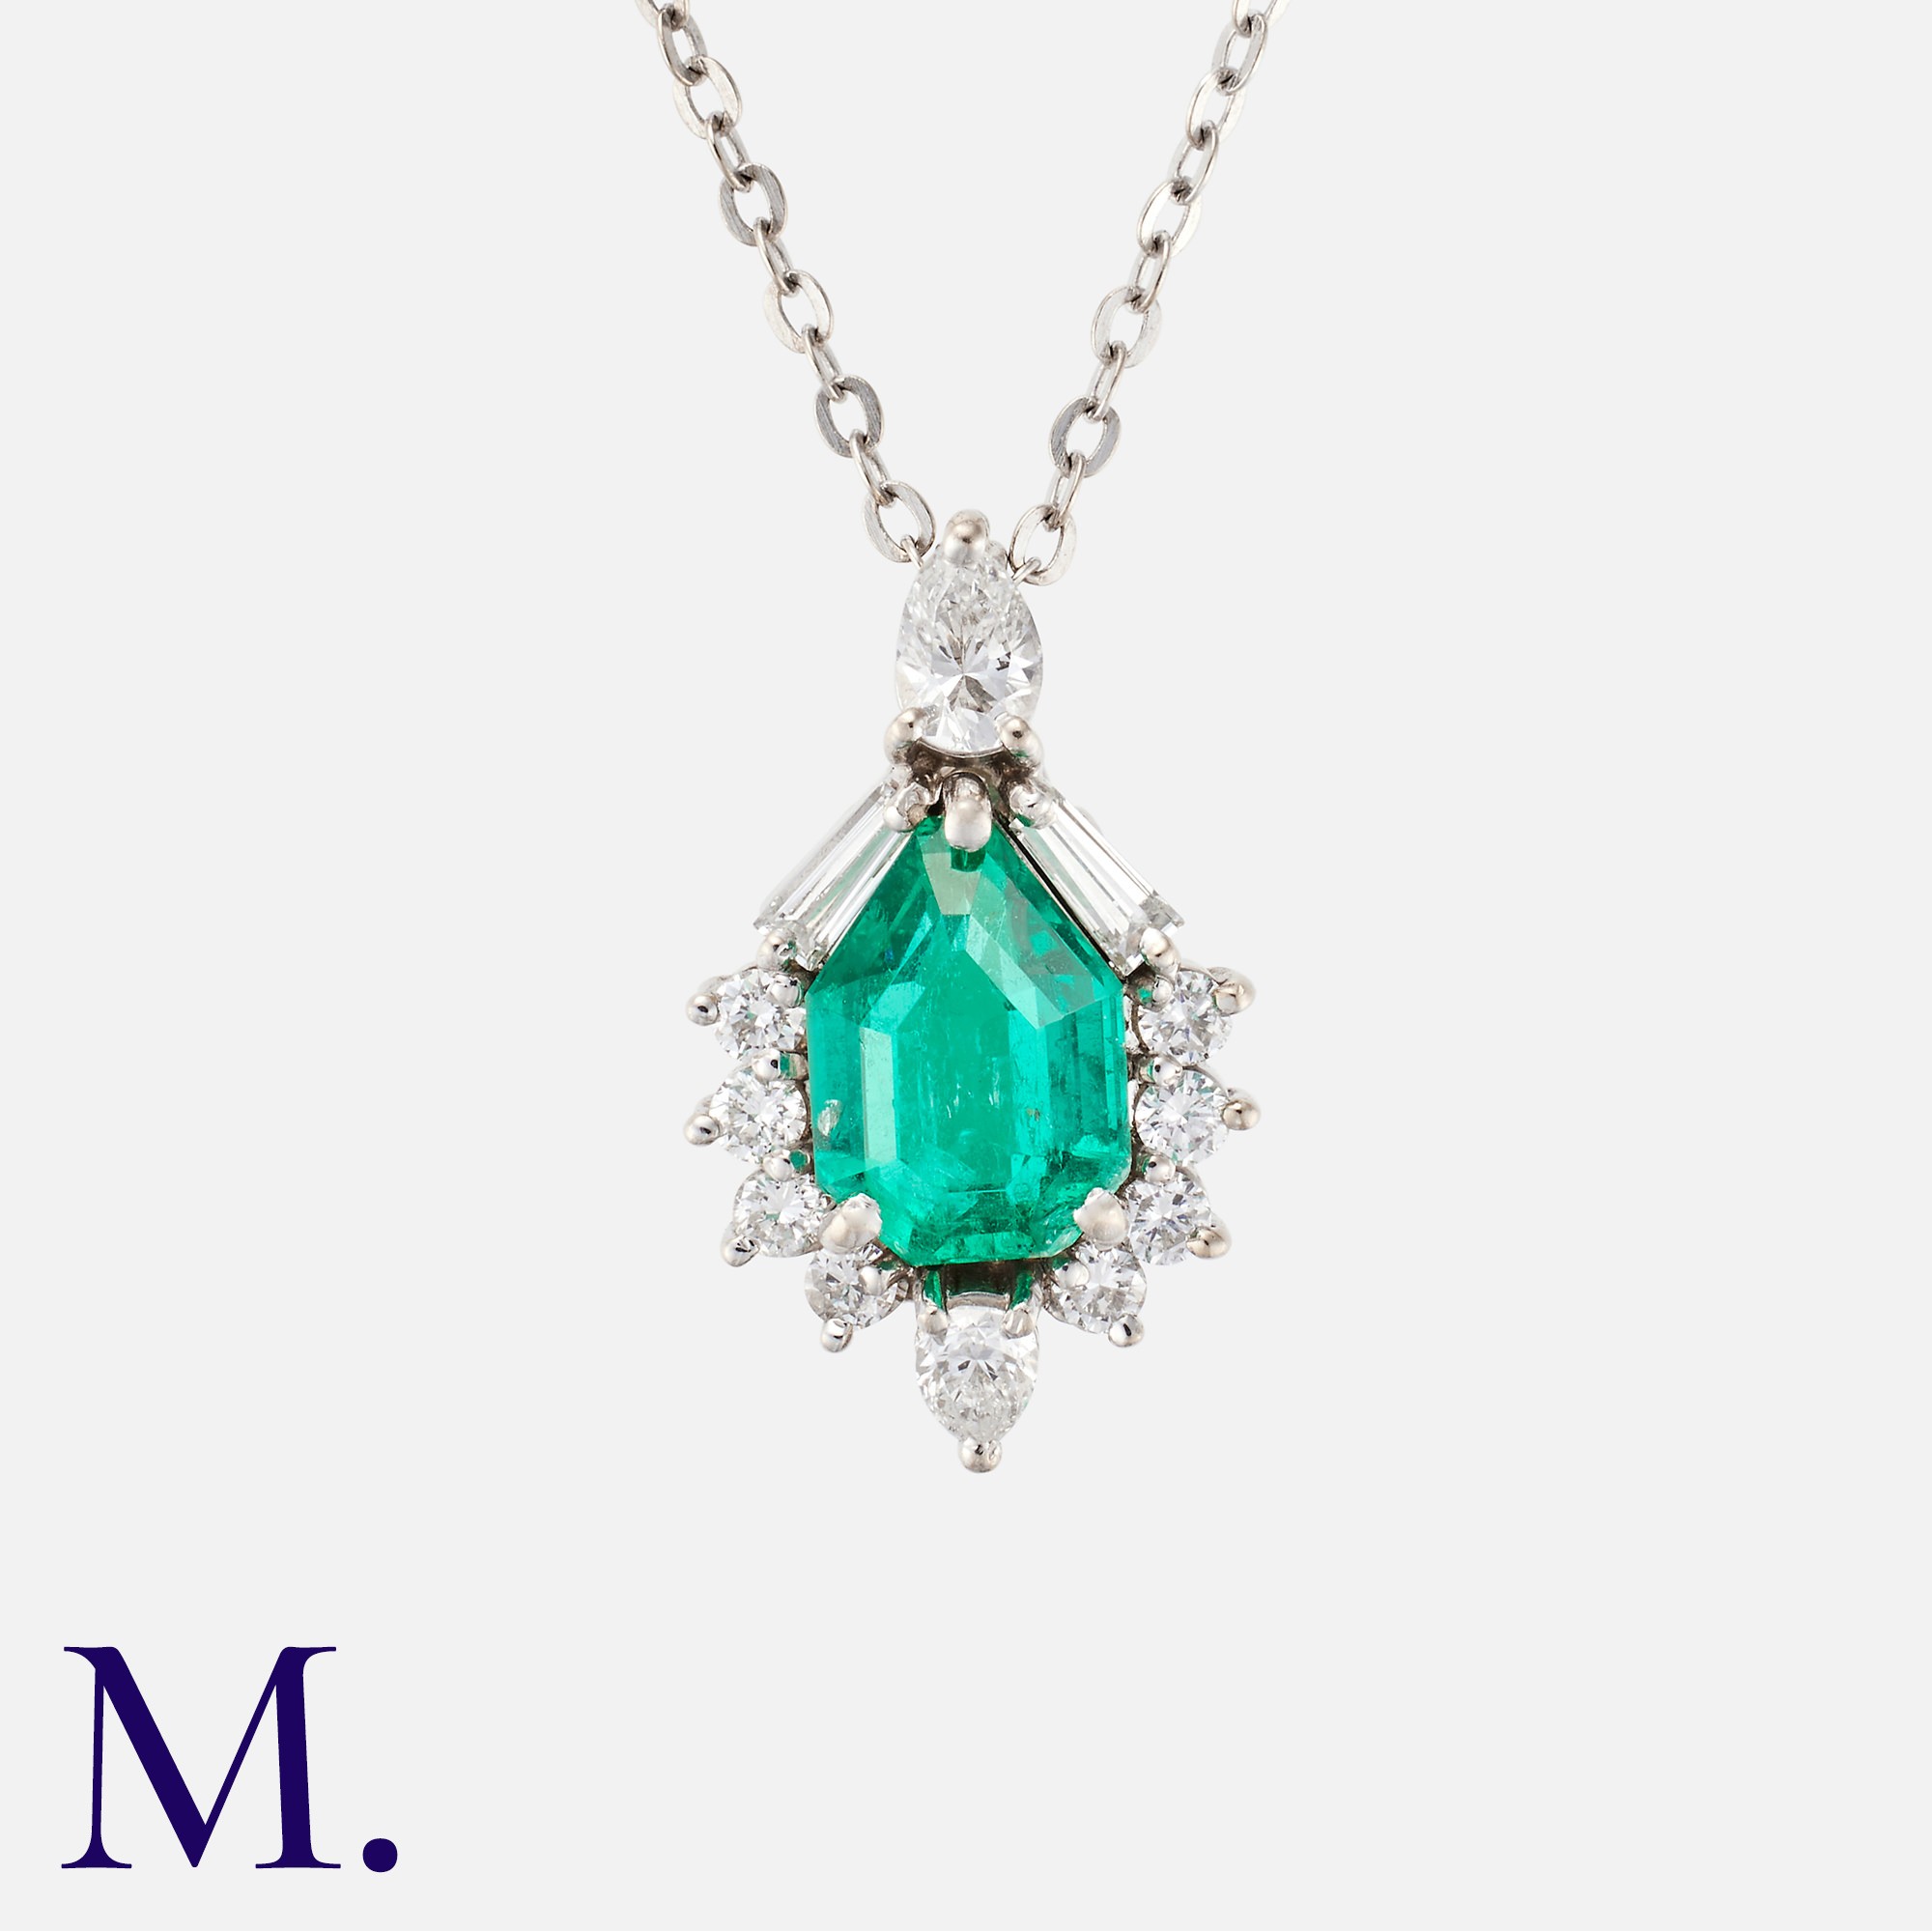 A Colombian Emerald & Diamond Pendant in 18k white gold, set with a principal mixed cut emerald